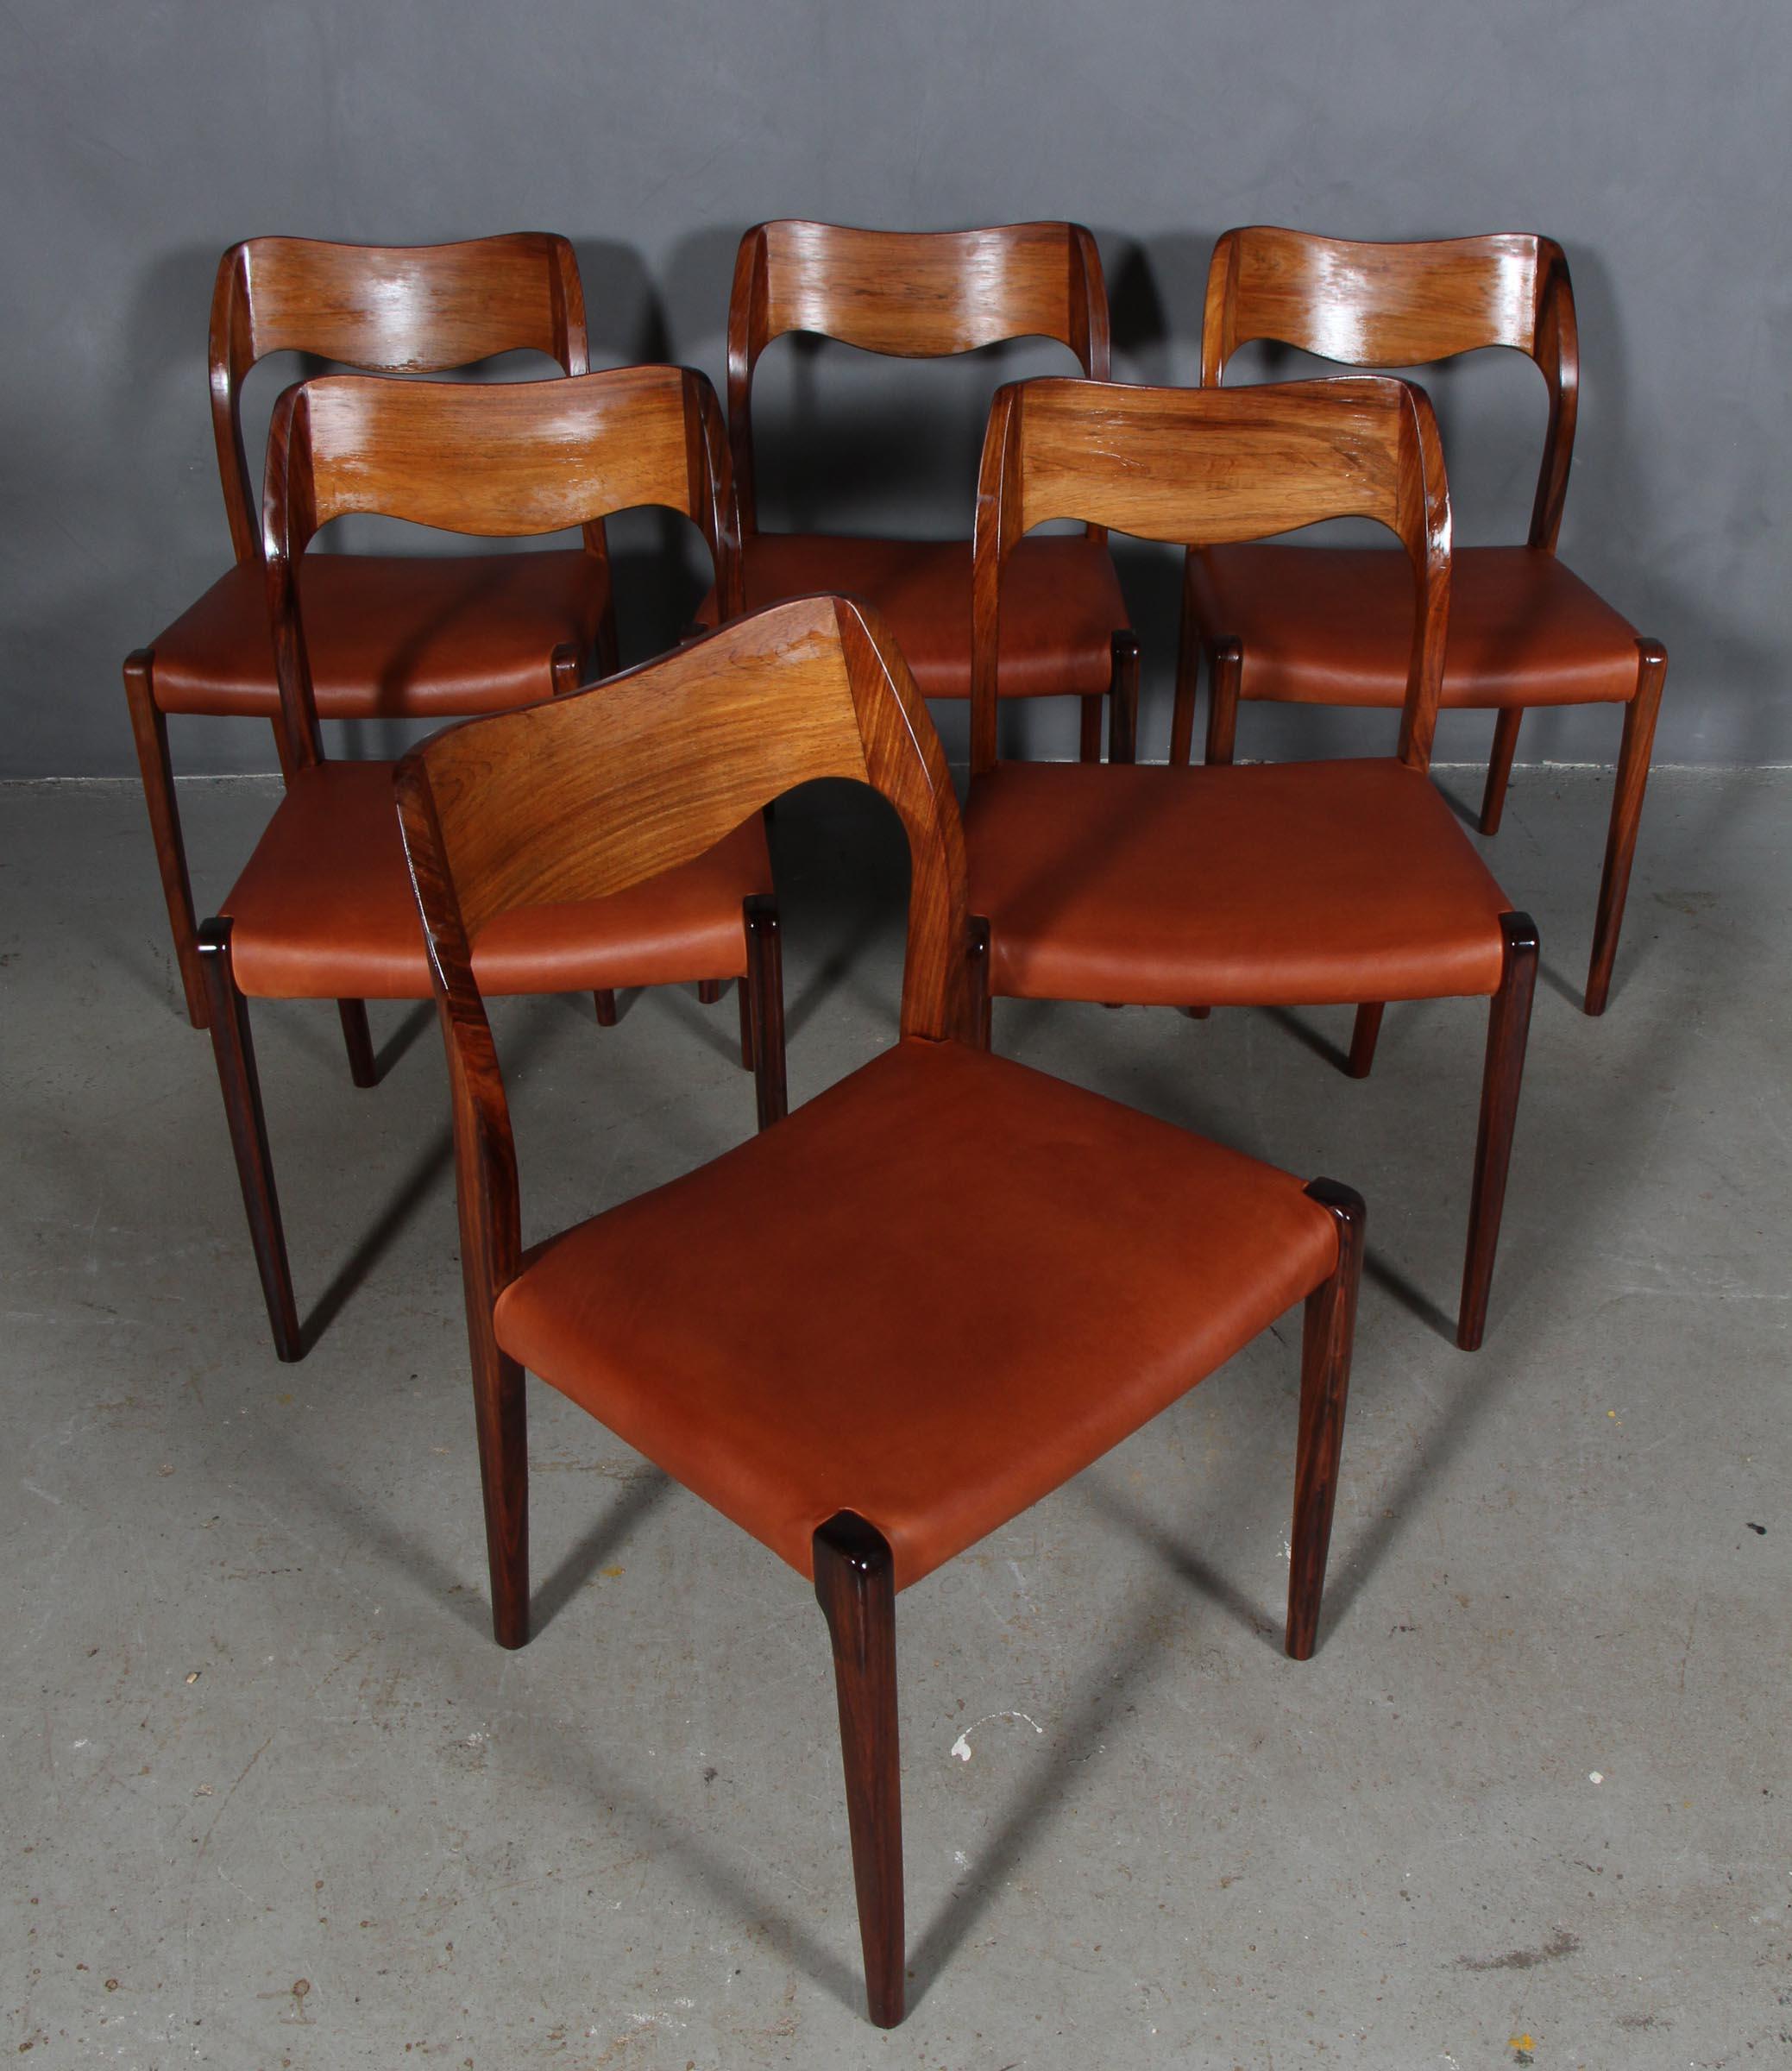 N. O. Møller set of six dining chairs in rosewood.

Seat new upholstered with vintage tan aniline leather.

Model 71, made by J. L. Møller, Denmark, 1960s.